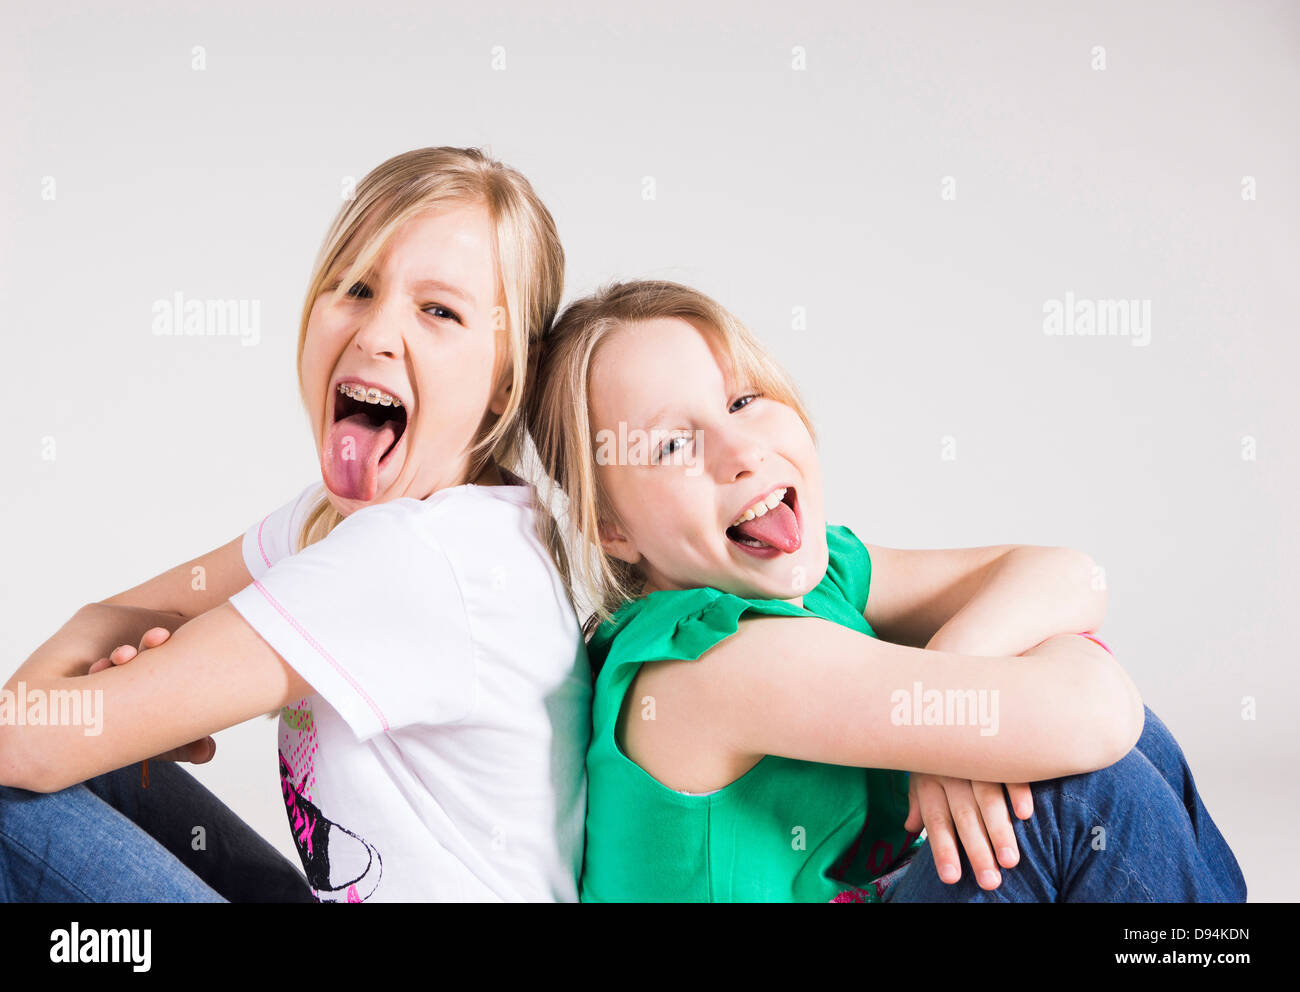 Portrait of Girls Sitting Back to Back and Sticking their Tongues Out Stock Photo